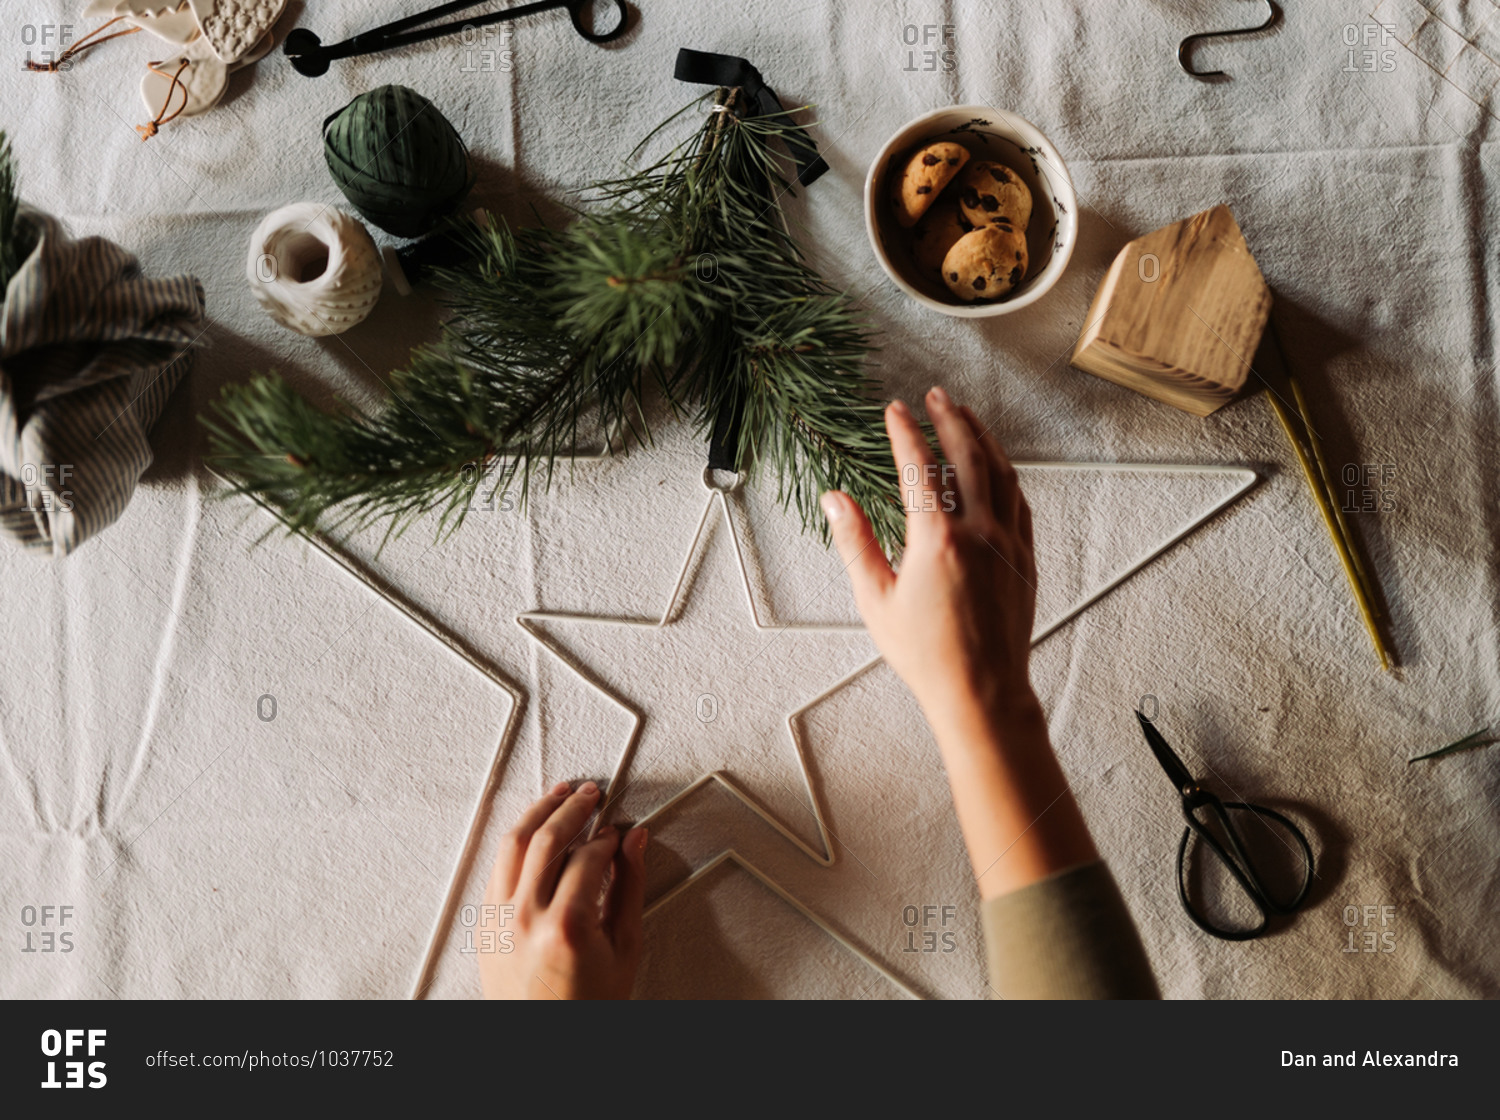 Overhead view of a crafter making Christmas decorations on table with linen tablecloth